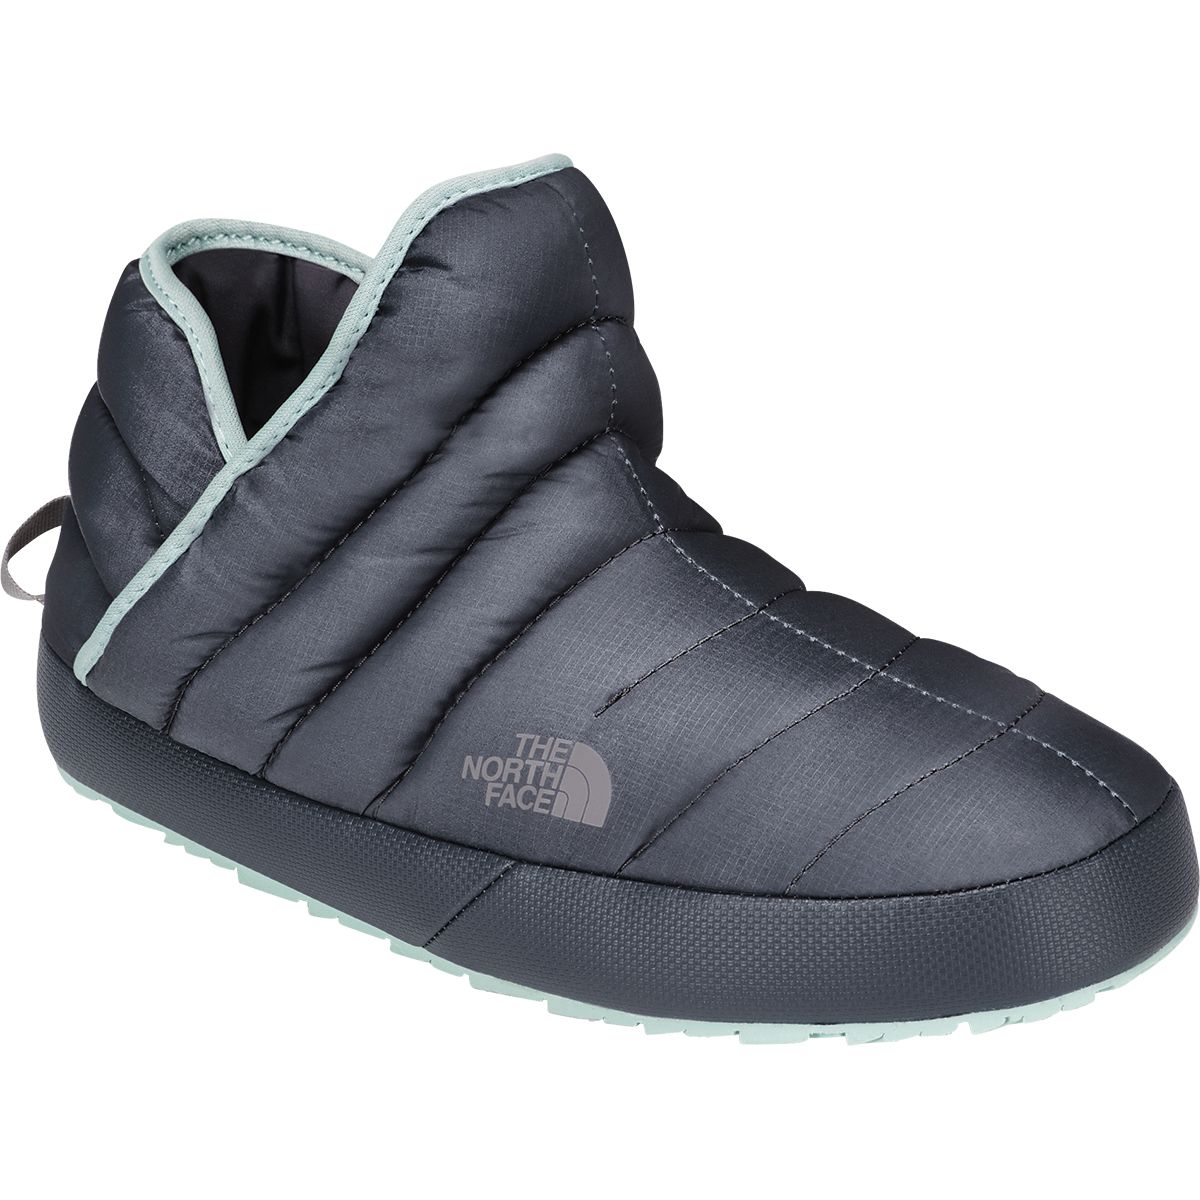 ThermoBall Eco Traction Bootie - Women